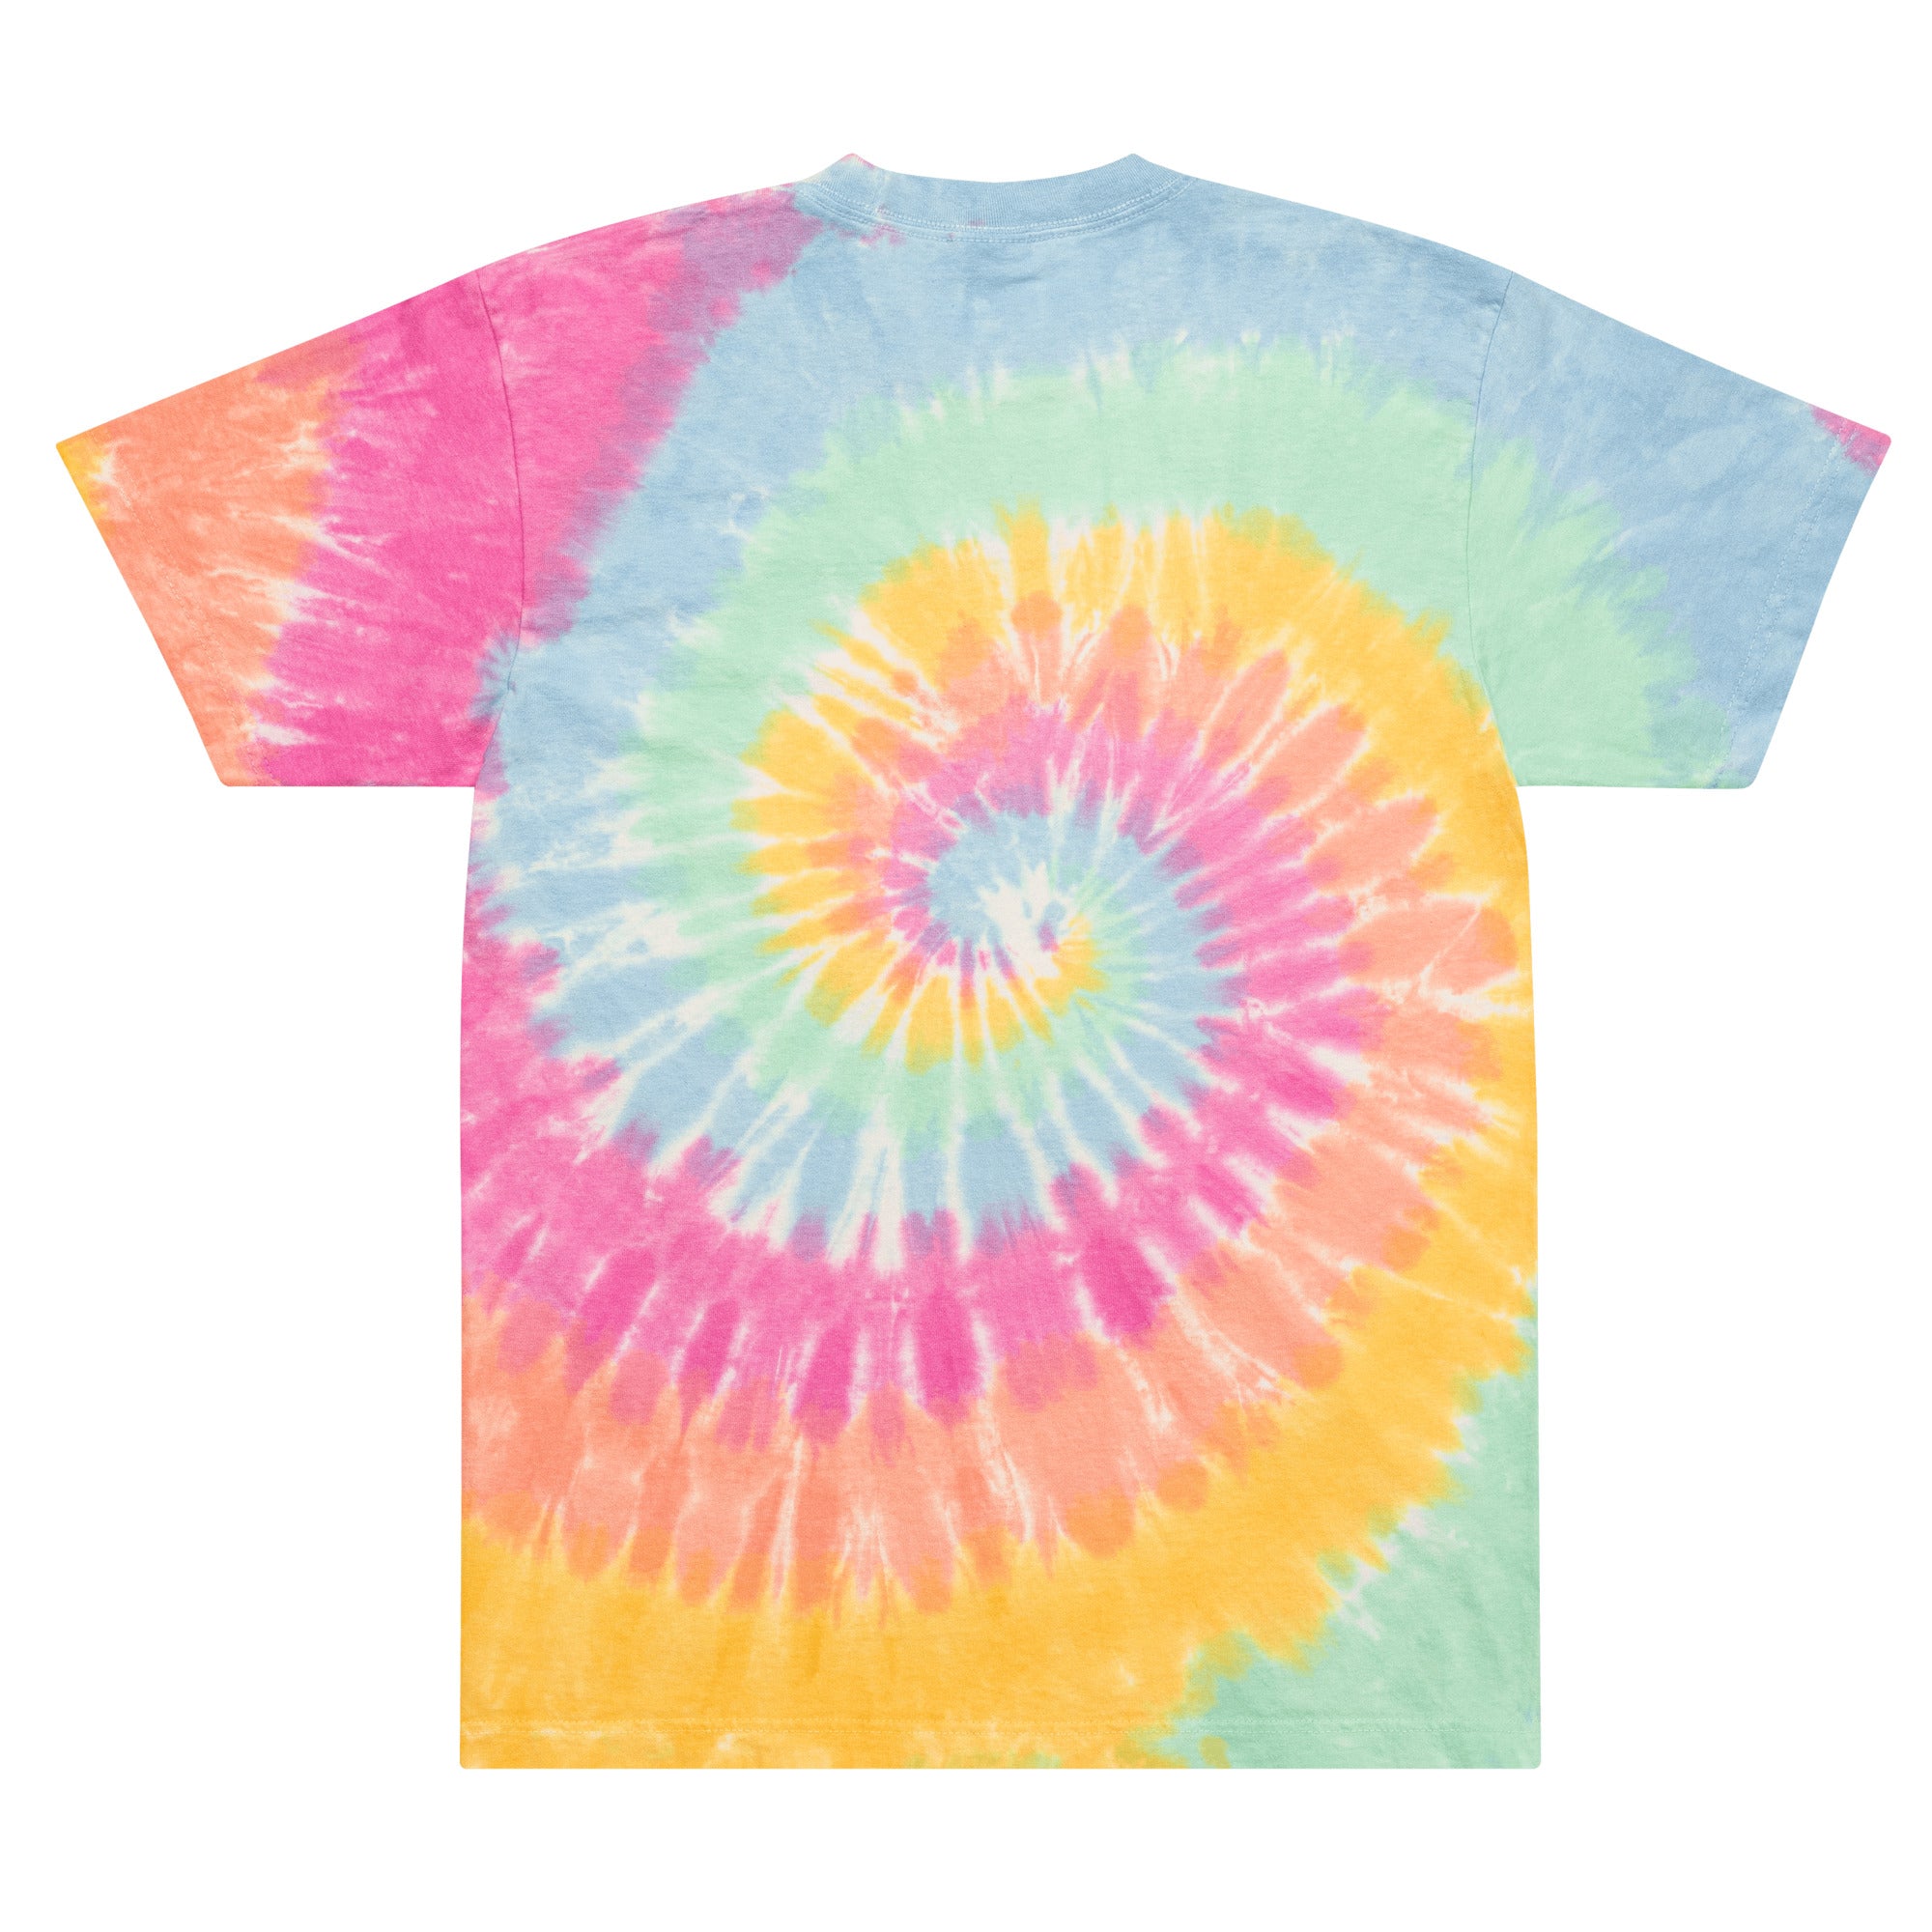 My AR-15 Identifies as a Bolt Action Rifle Oversized Tie-dye Embroidered T-shirt